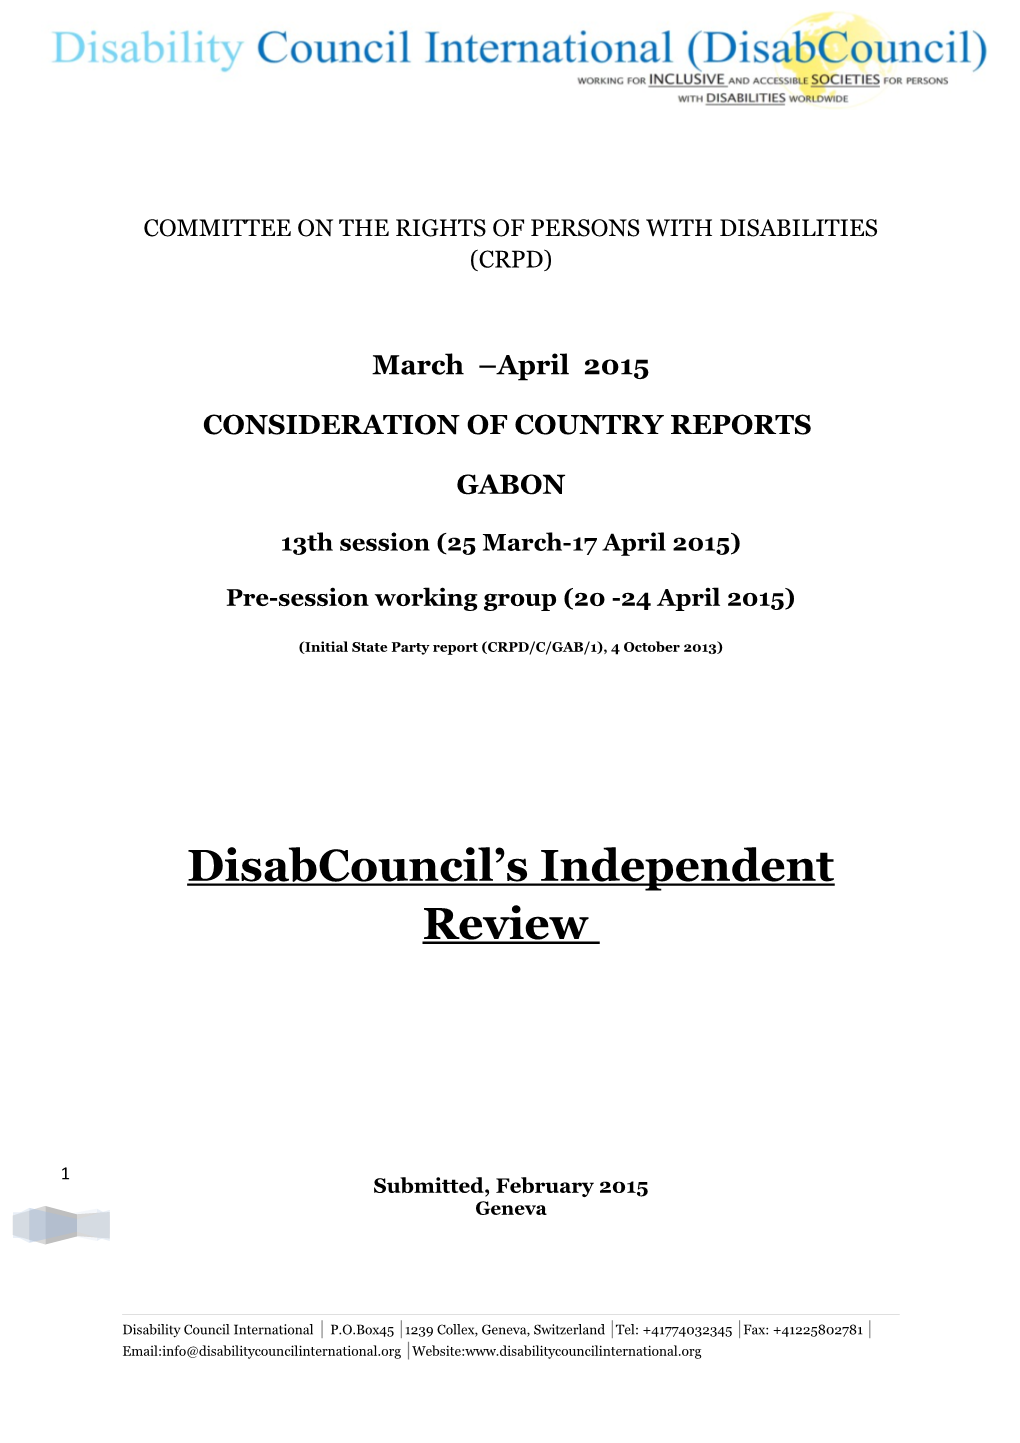 Committee on the Rights of Persons with Disabilities (Crpd)